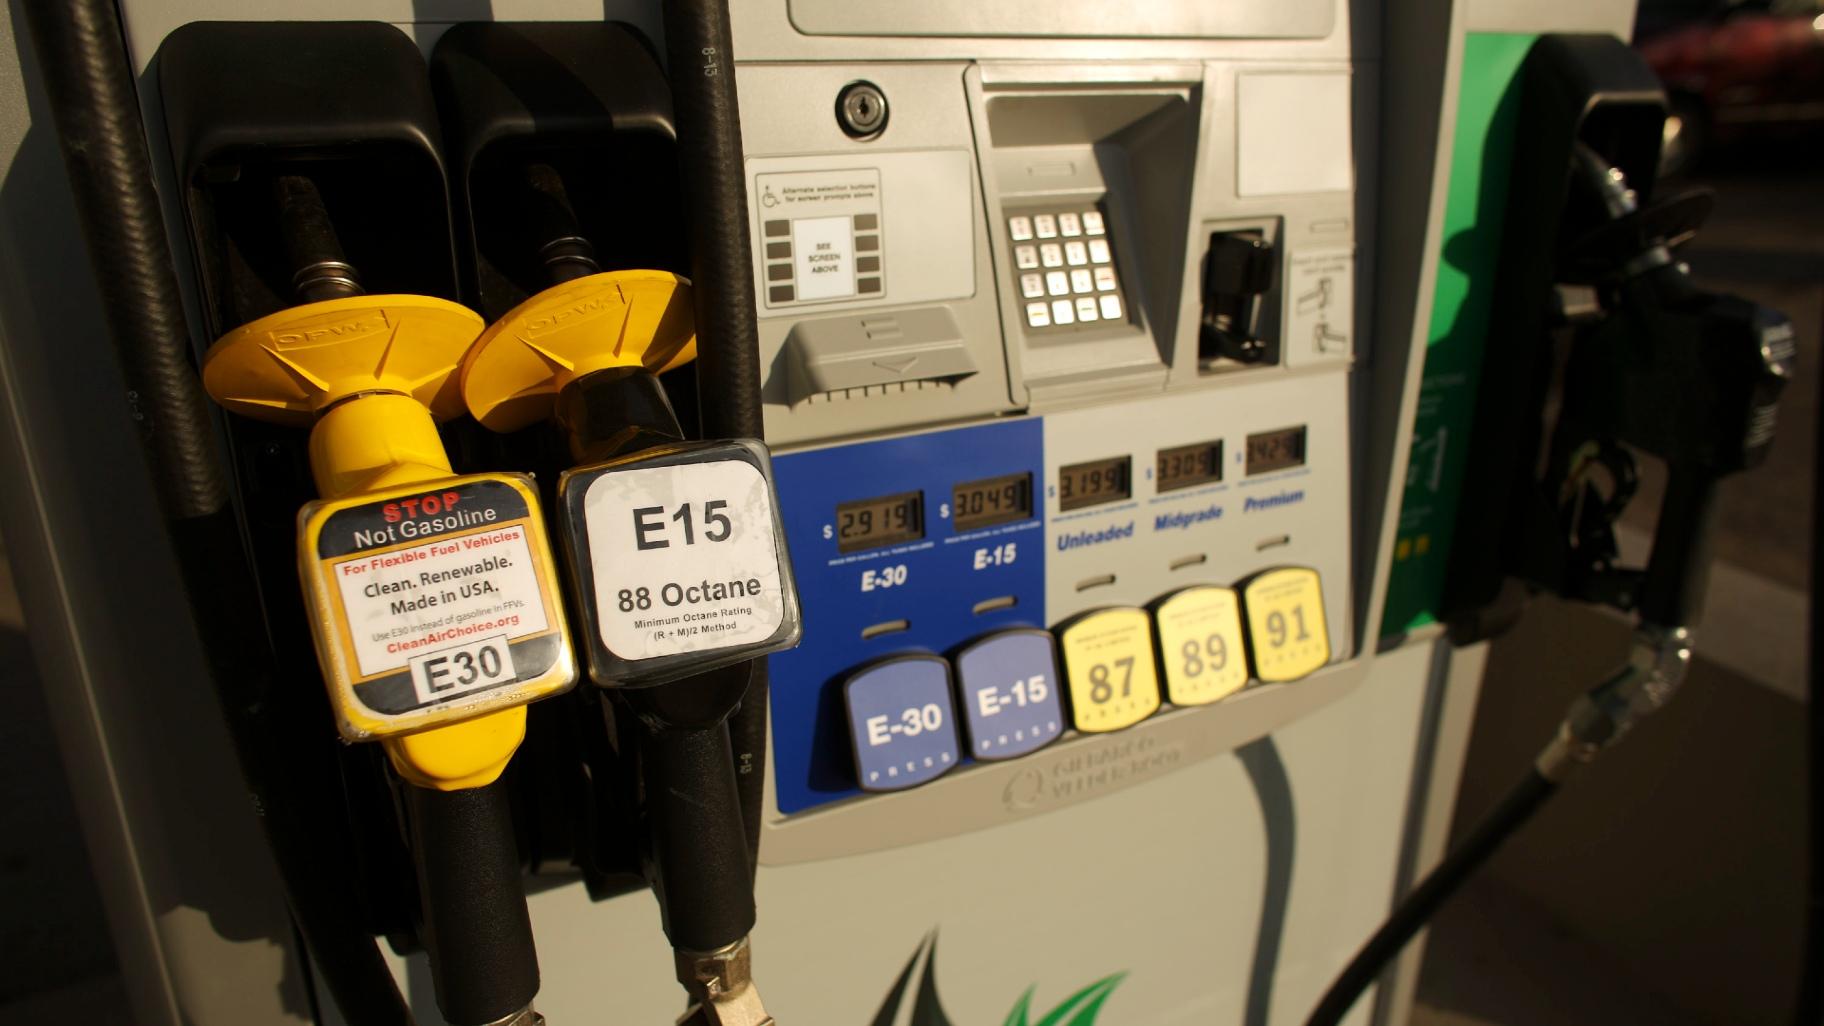 An E15 nozzle is displayed on a pump at service station in Minneapolis, Monday, Oct. 28, 2013, photo. (Jeff Wheeler / Star Tribune via AP, File)